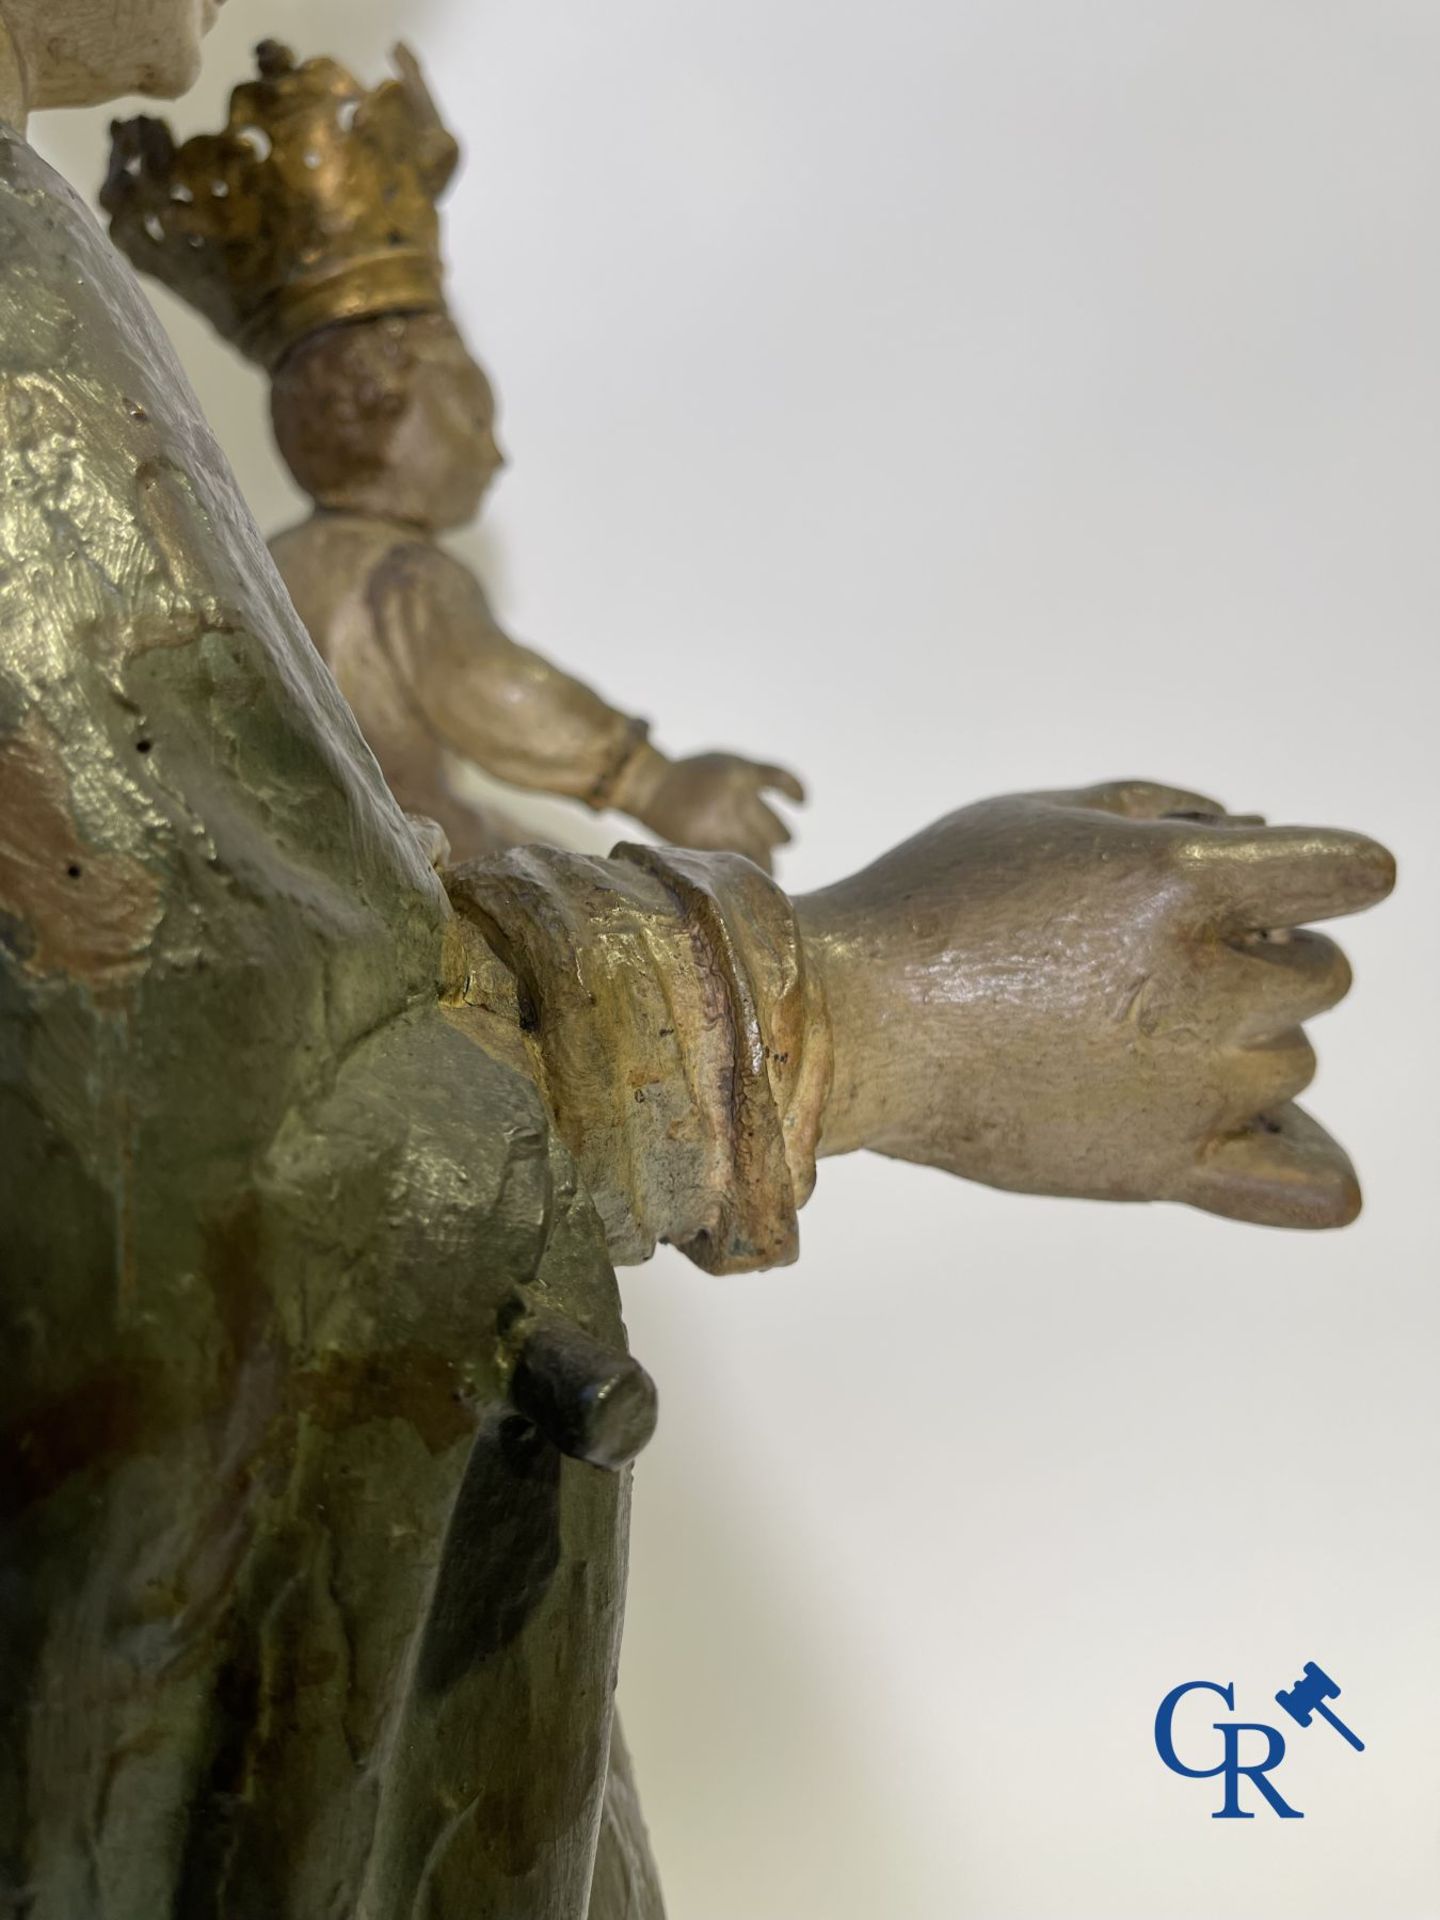 Wooden polychrome Baroque sculpture of Mary with child. The Crown inlaid with an amber-like rock. - Image 18 of 30